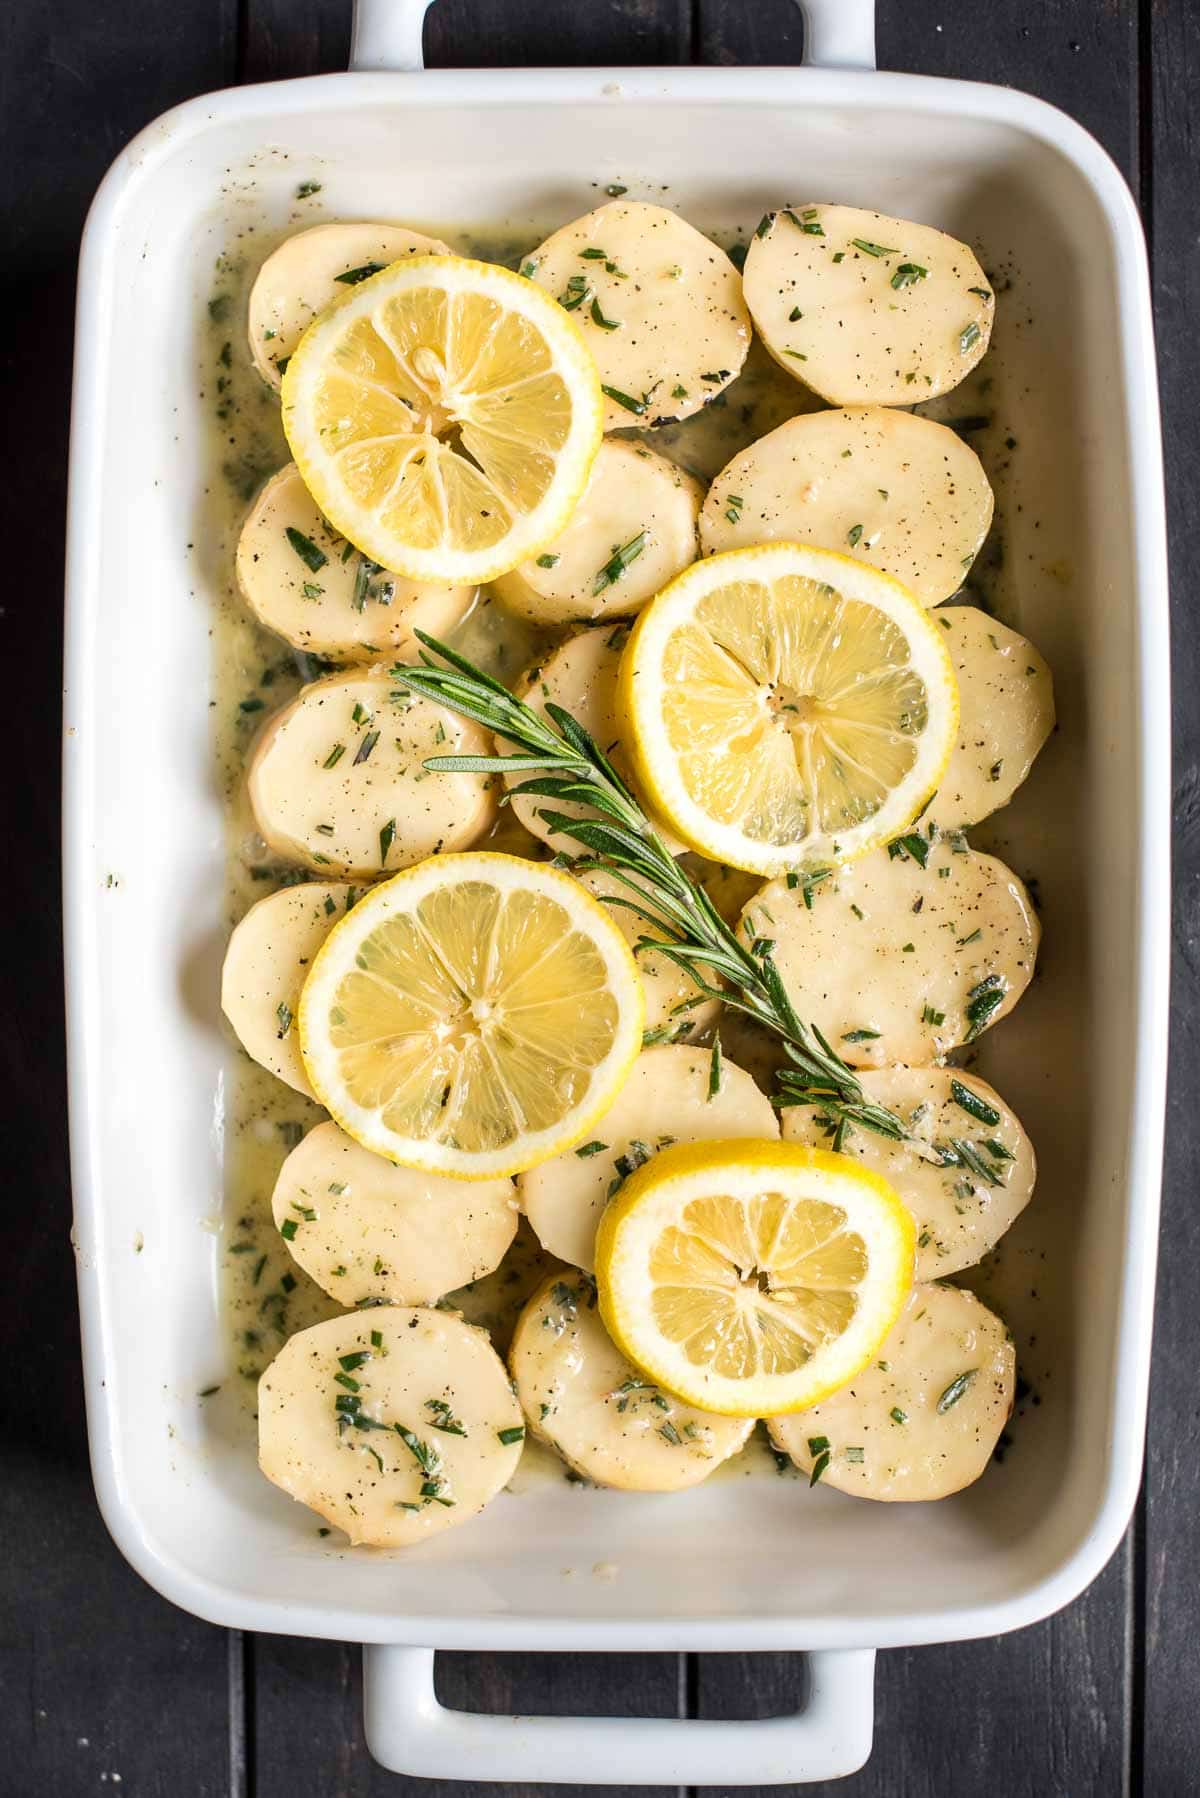 These Lemon Rosemary Melting Potatoes are an easy weeknight side dish.